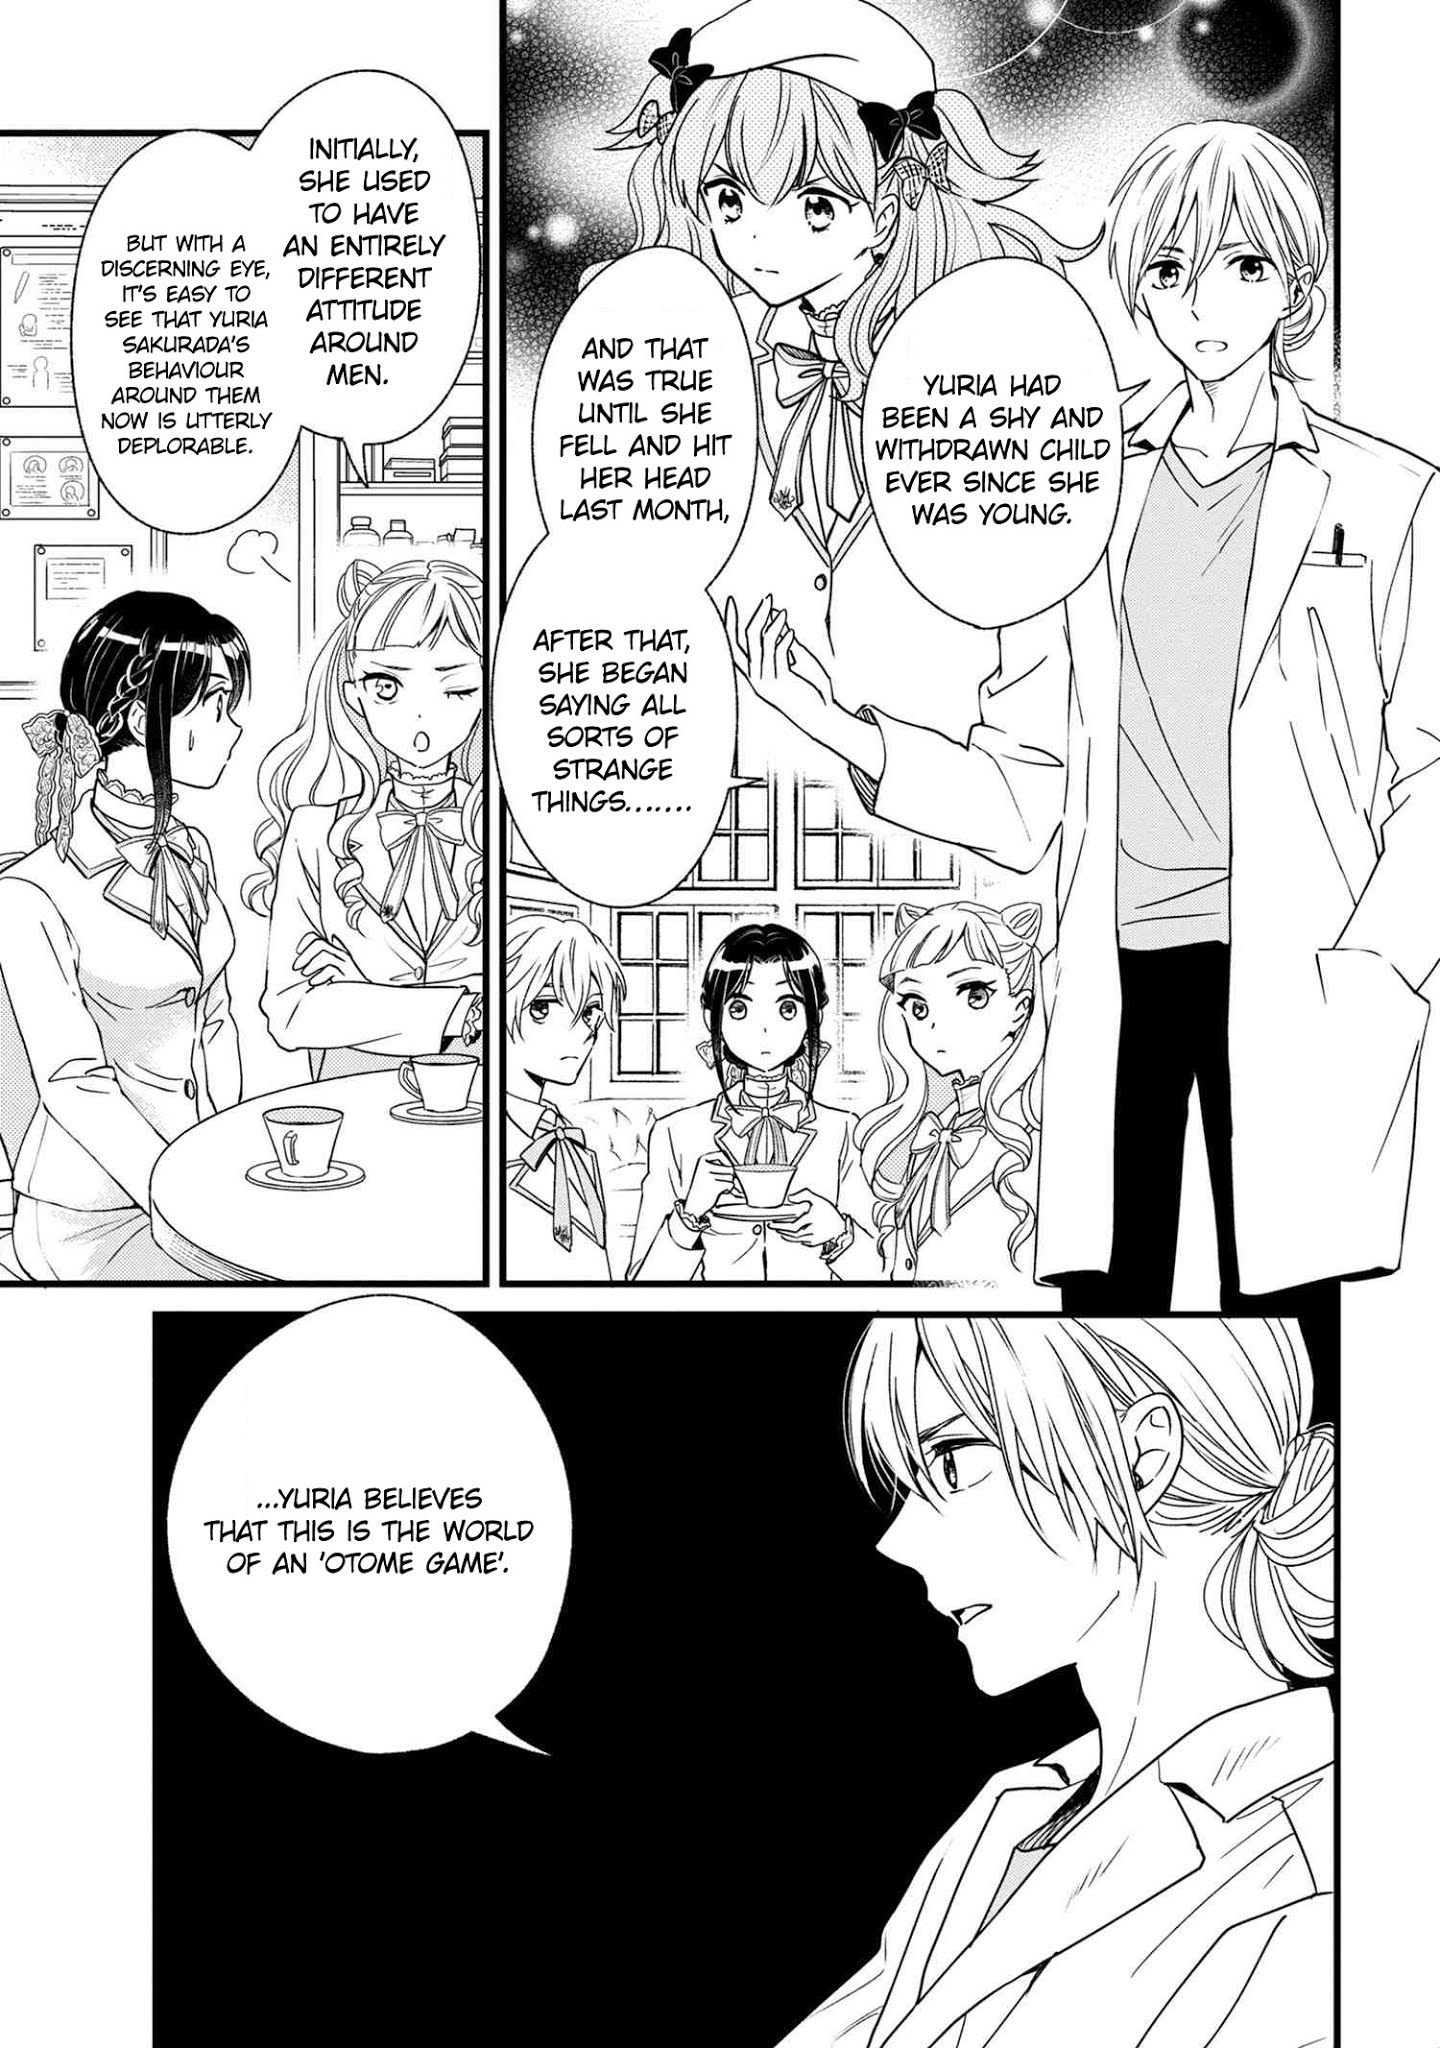 Reiko's Style: Despite Being Mistaken For A Rich Villainess, She's Actually Just Penniless - Page 2